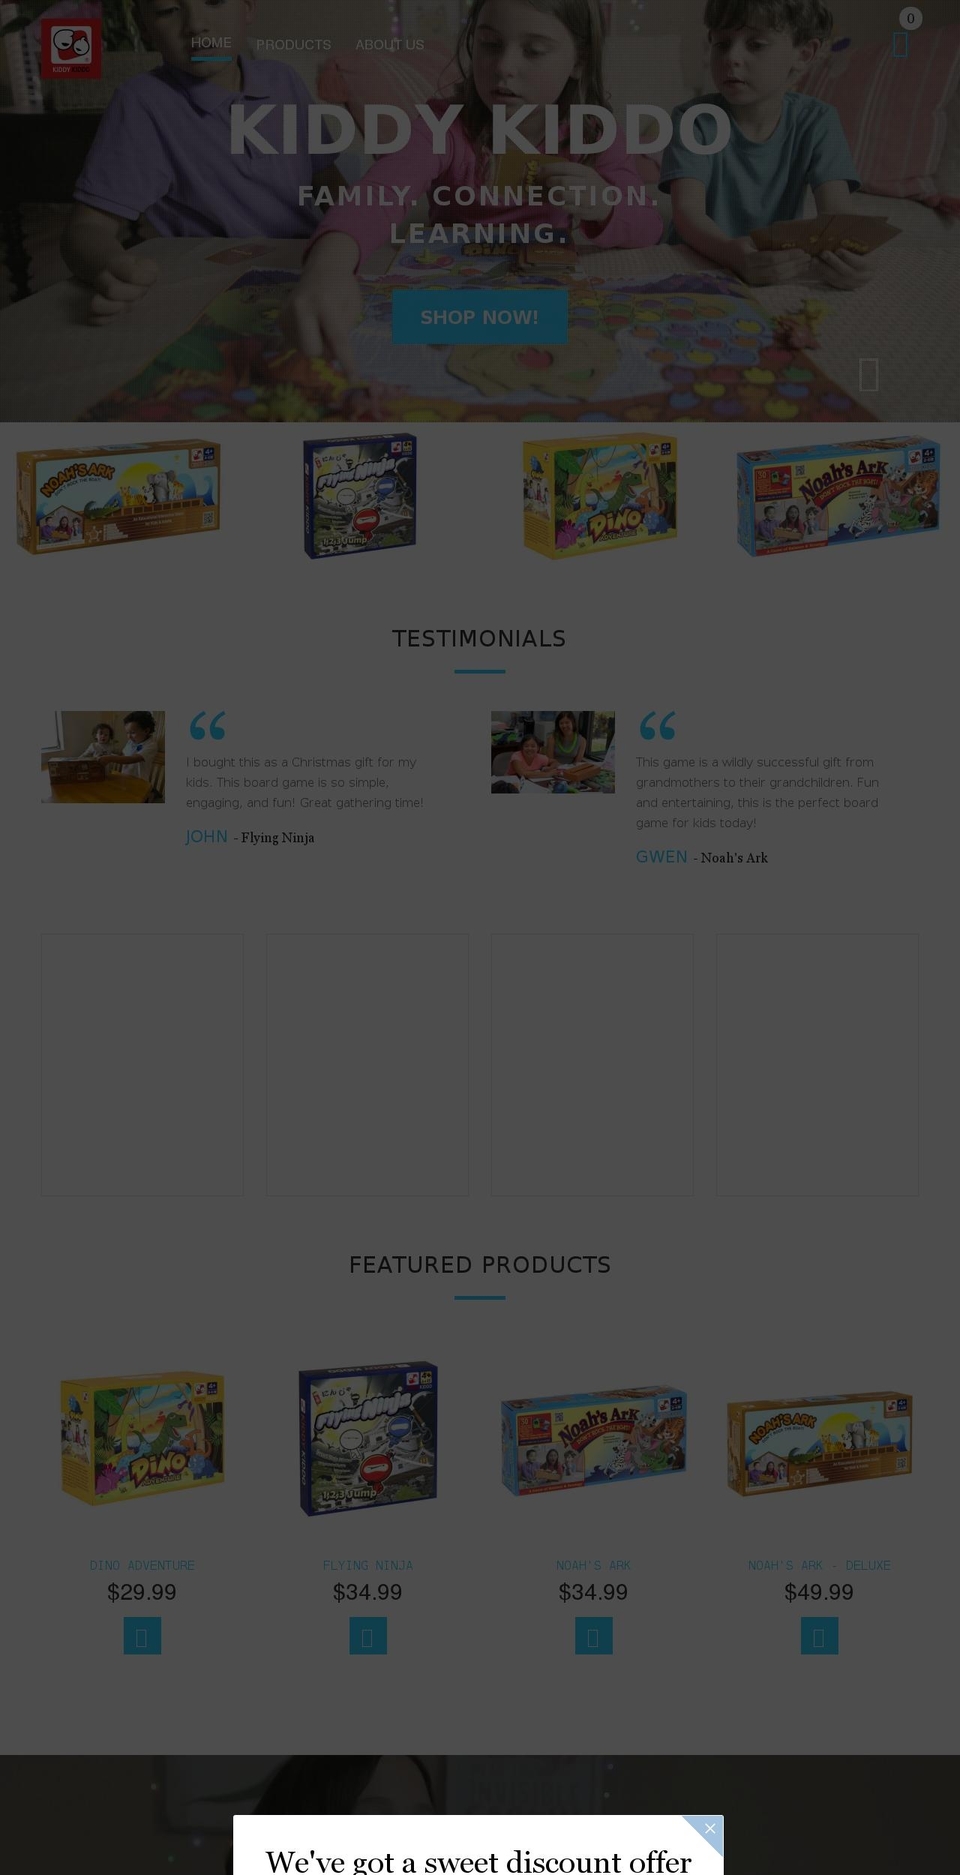 YourStore Shopify theme site example kiddykiddousa.com